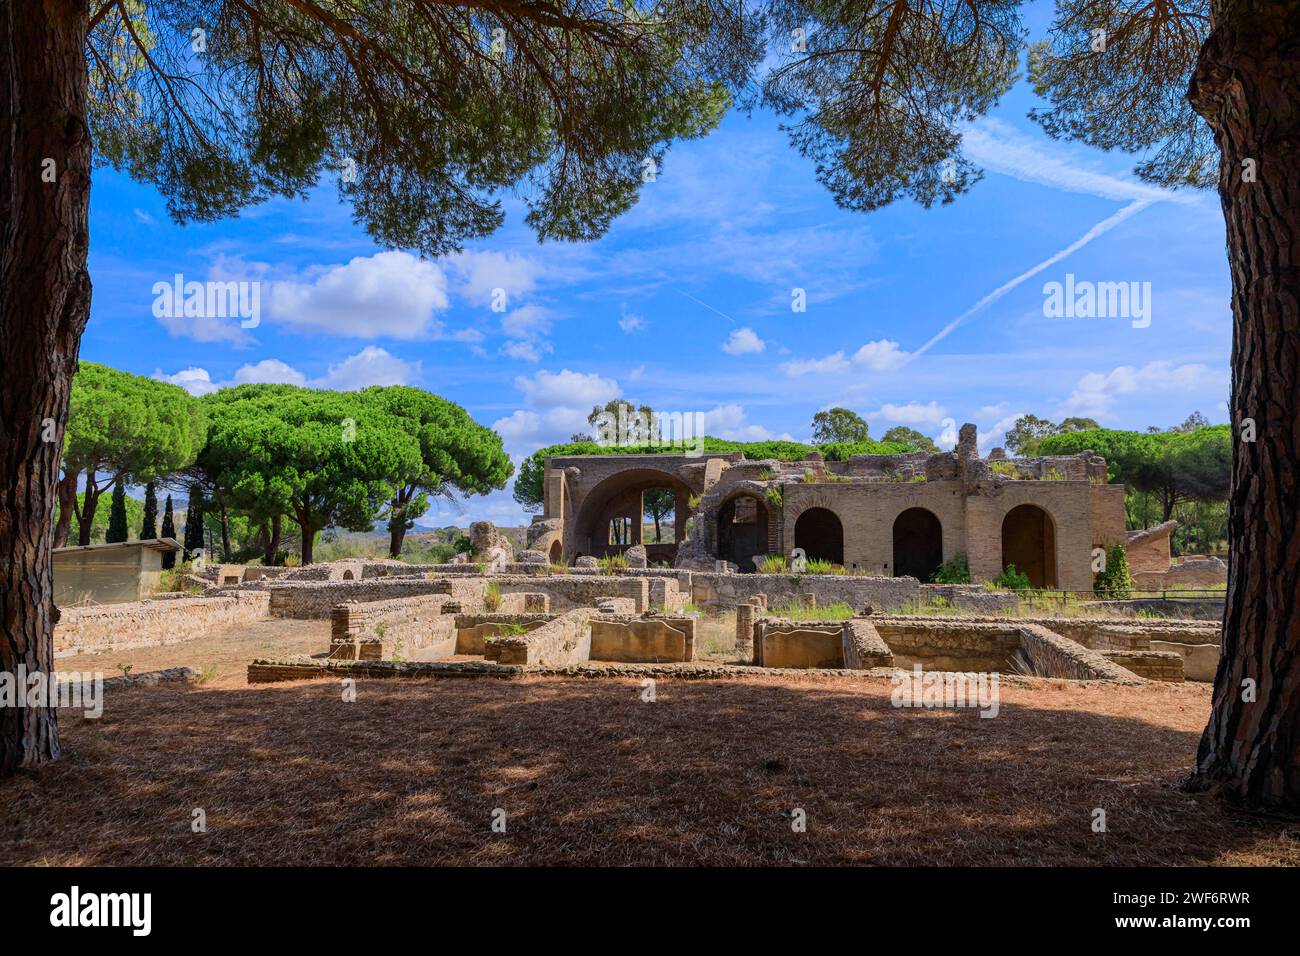 View of Taurine Baths near Civitavecchia in Italy. They are also known as the Baths of Trajan. Stock Photo